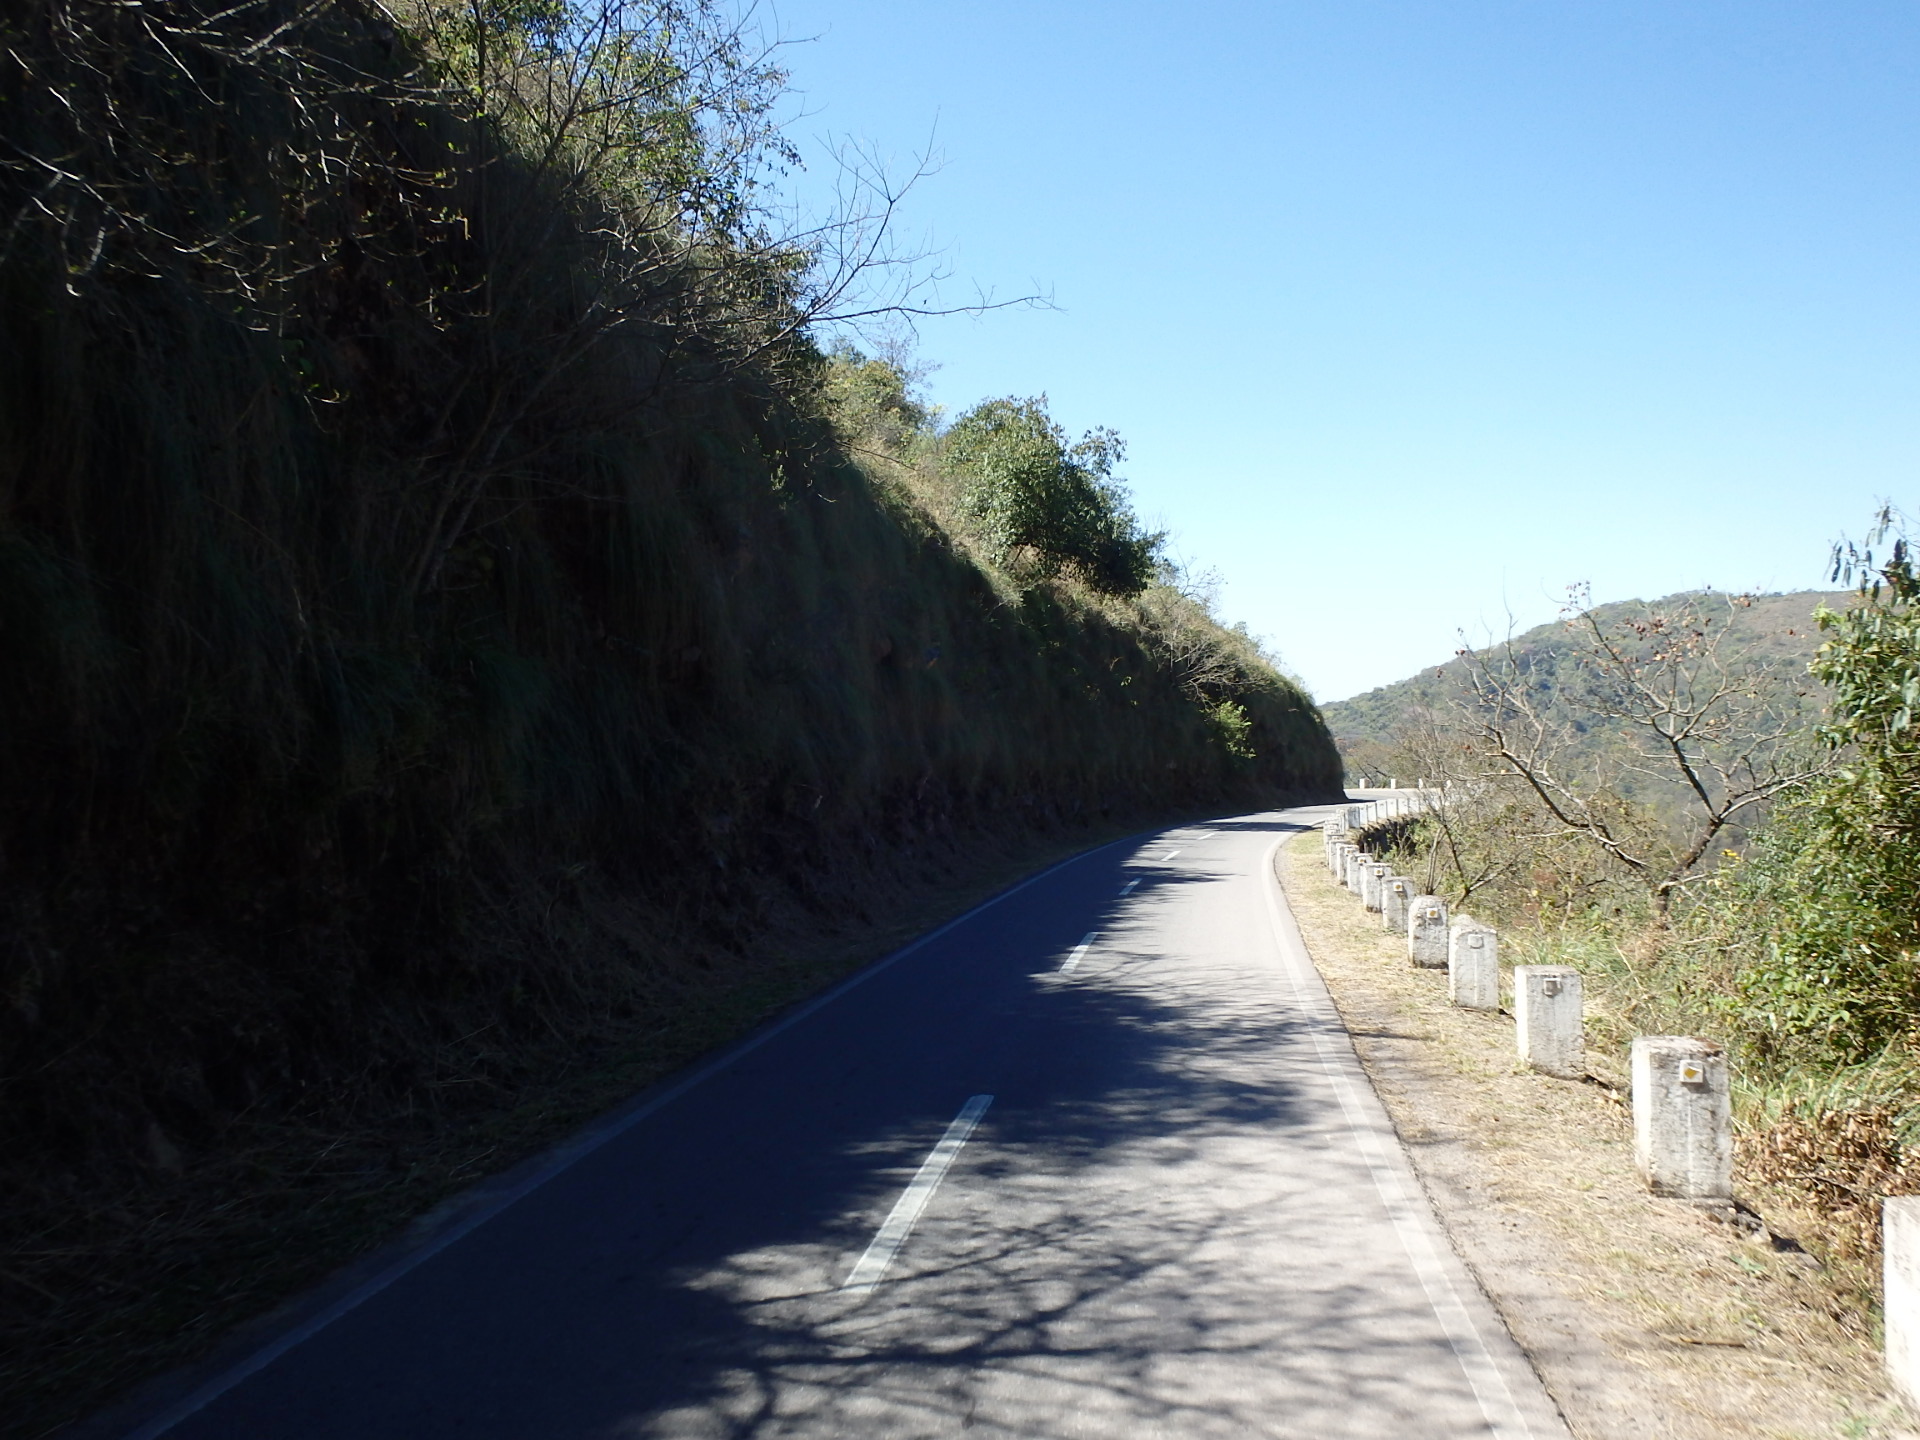 Heading downhill and east on the Pan-American Highway.